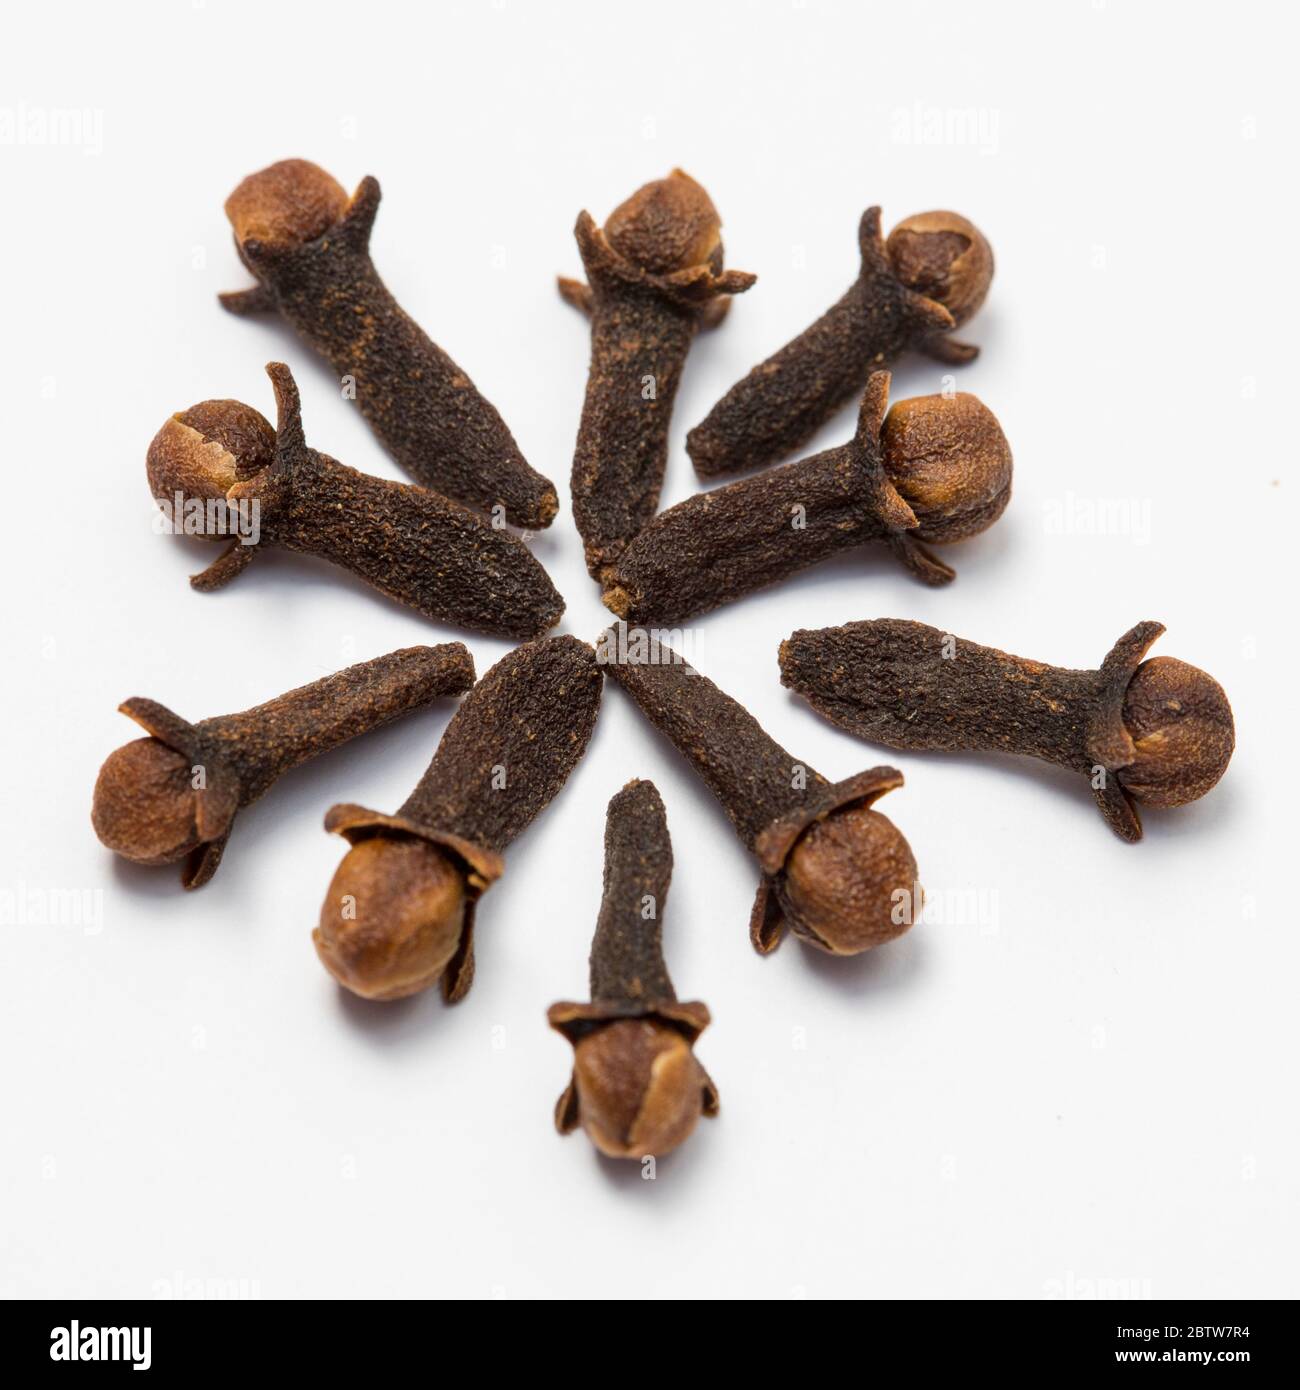 Closu-up view of dried cloves on white background Stock Photo